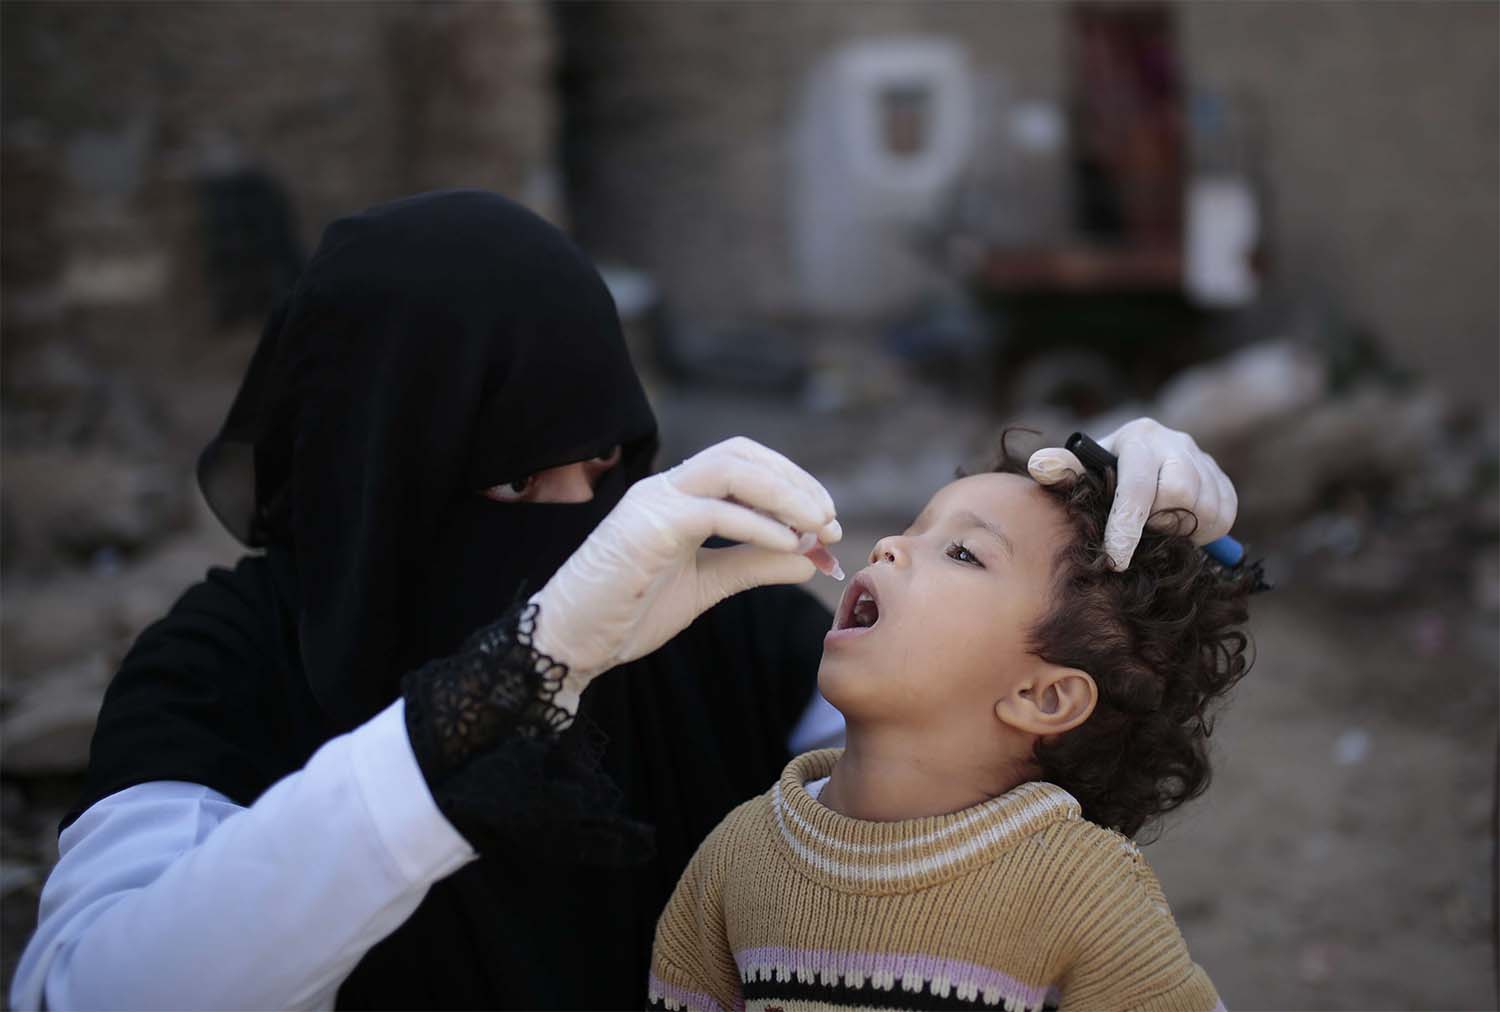 A nationwide campaign run by the WHO and UNICEF to vaccinate Yemen's children 